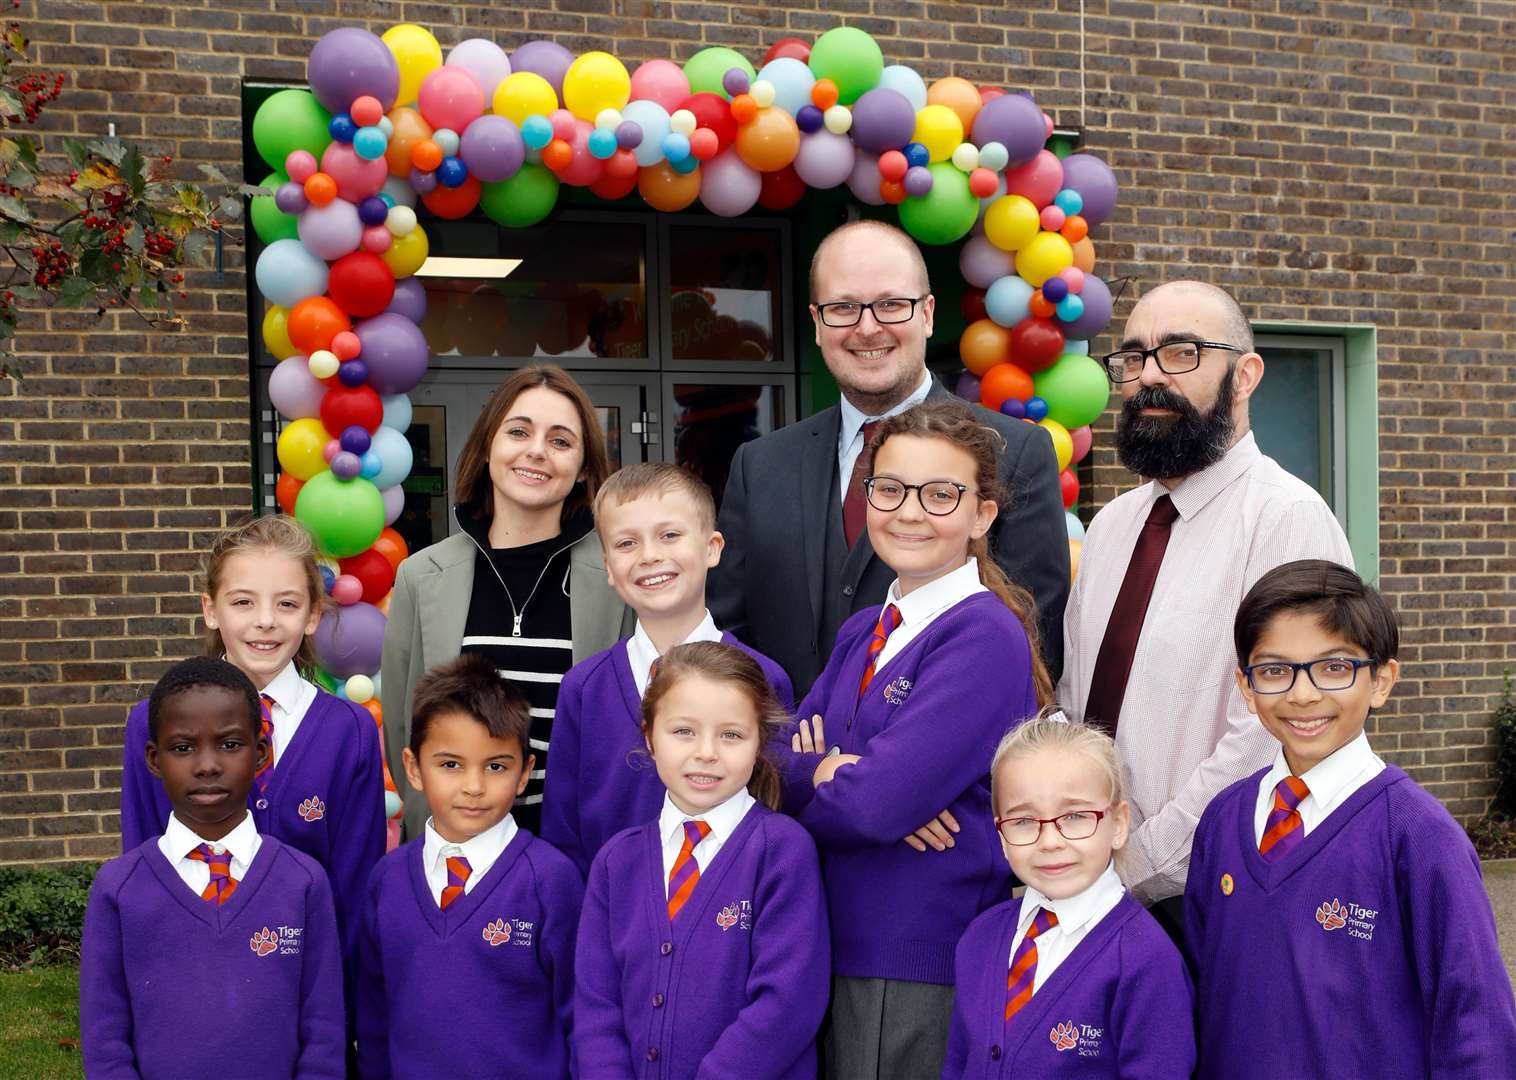 Pupils, staff, and governors from Tiger Primary School in Loose, Maidstone are celebrating after being graded ‘Good’ in its recent Ofsted report